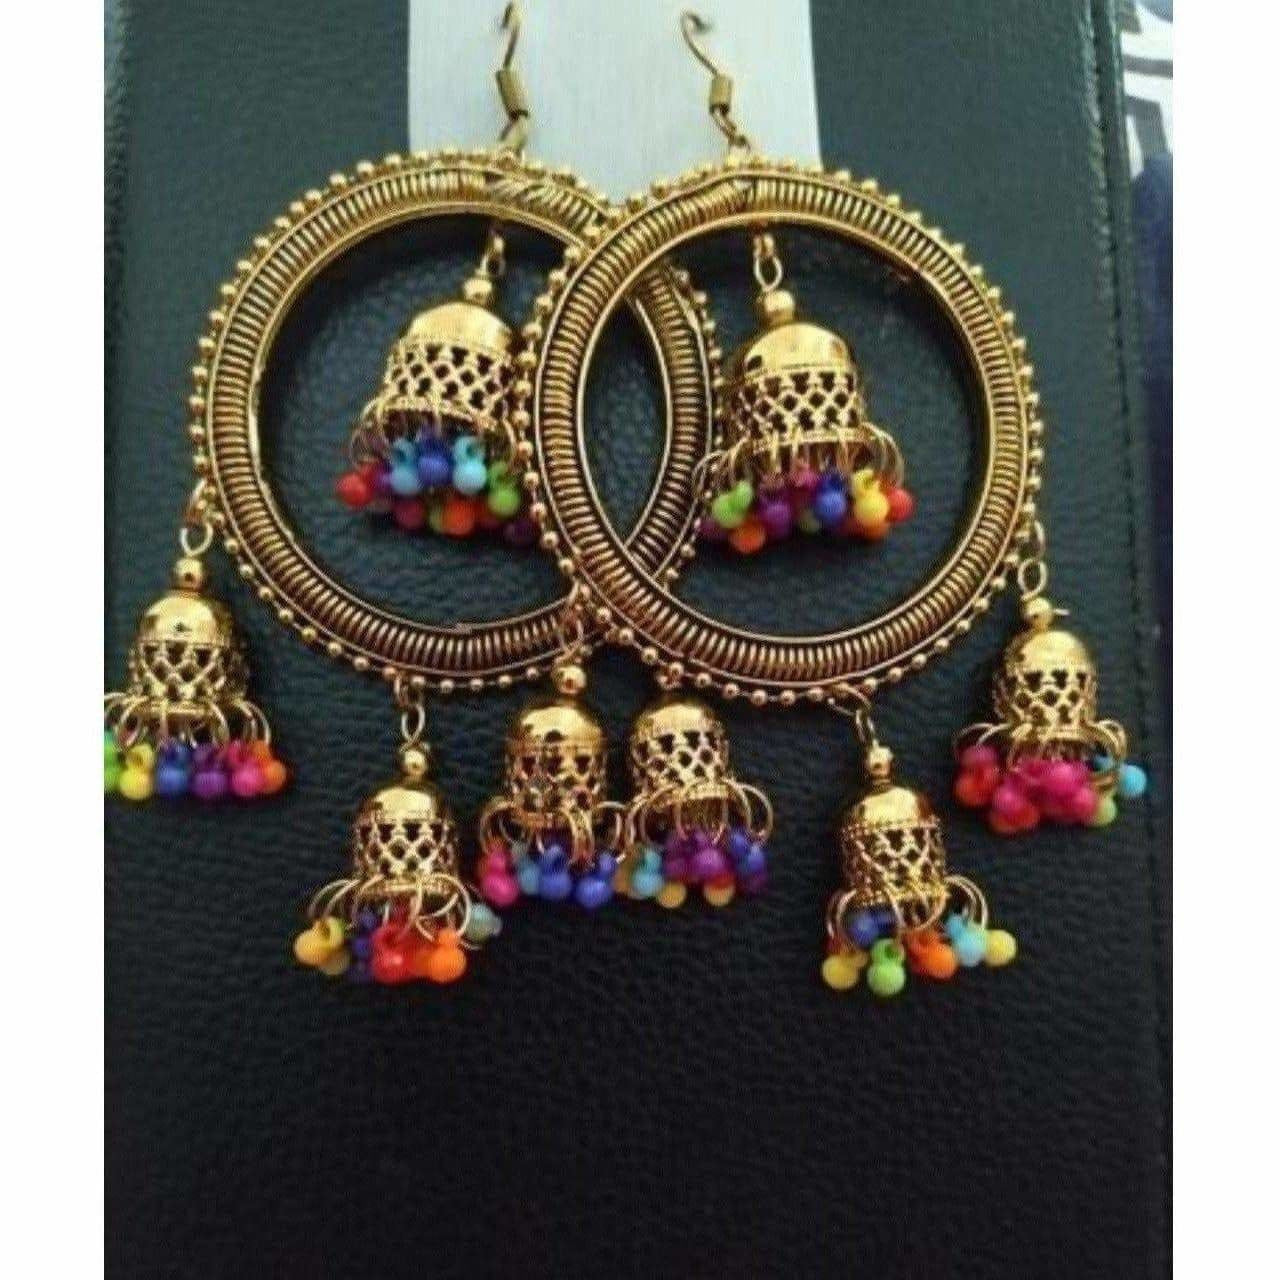 Traditional Gold Plated Latkan Ring Earrings With Jhumkas And Pearls For Weddings